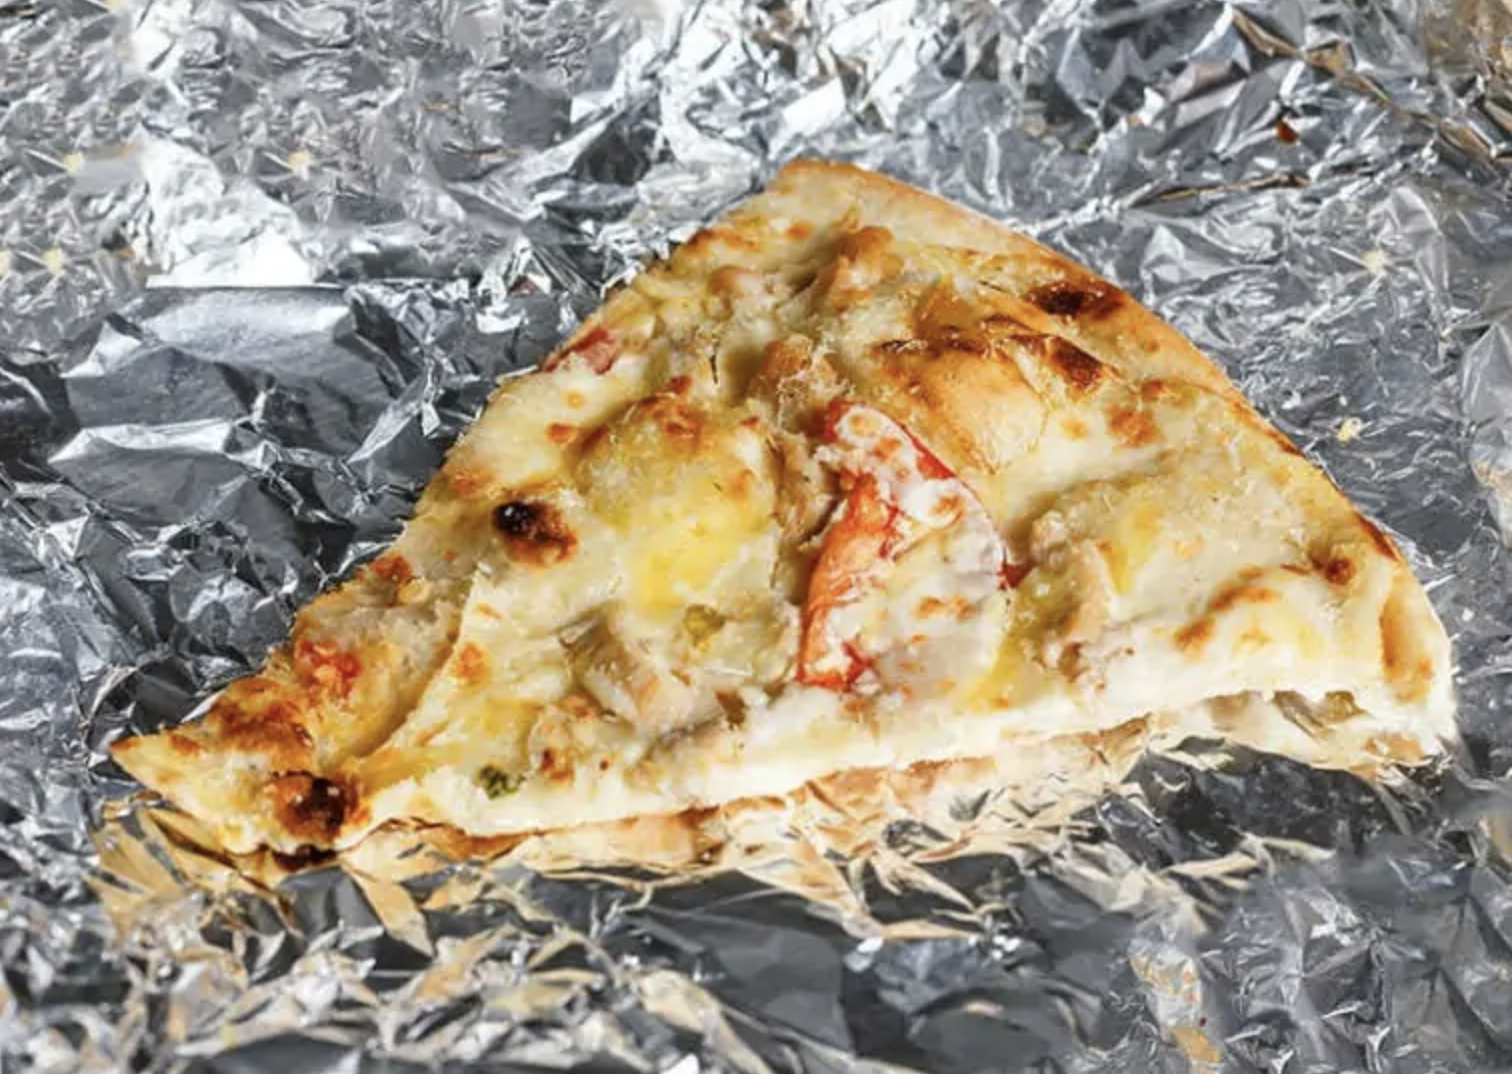 How to Keep Pizza Warm In Aluminum Foil